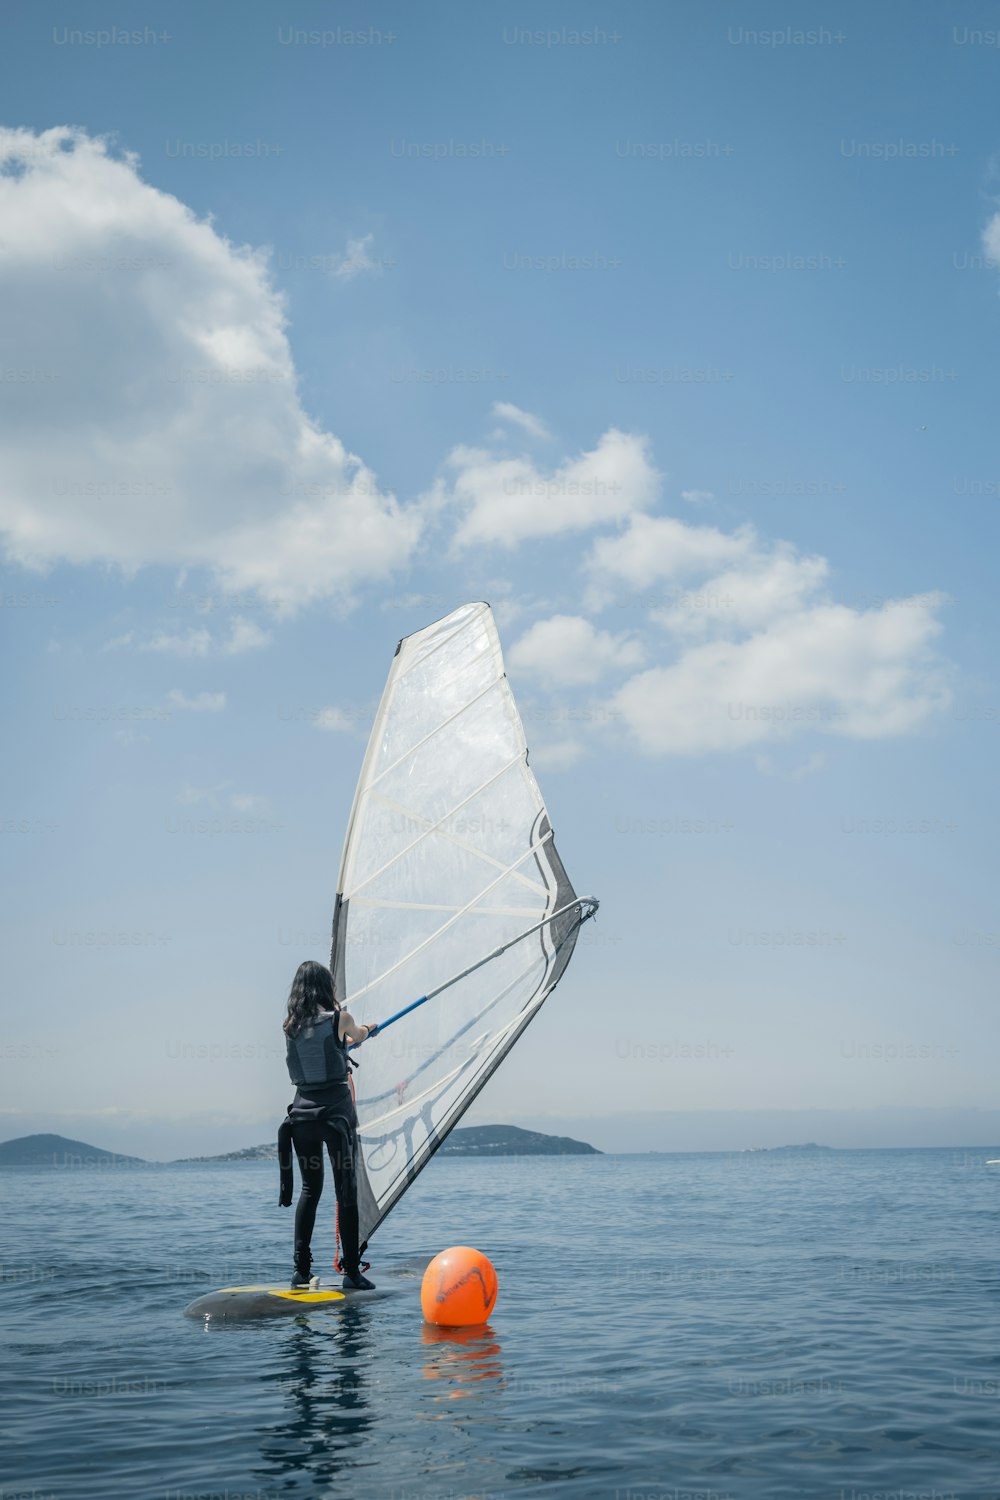 a person on a surfboard with a sail